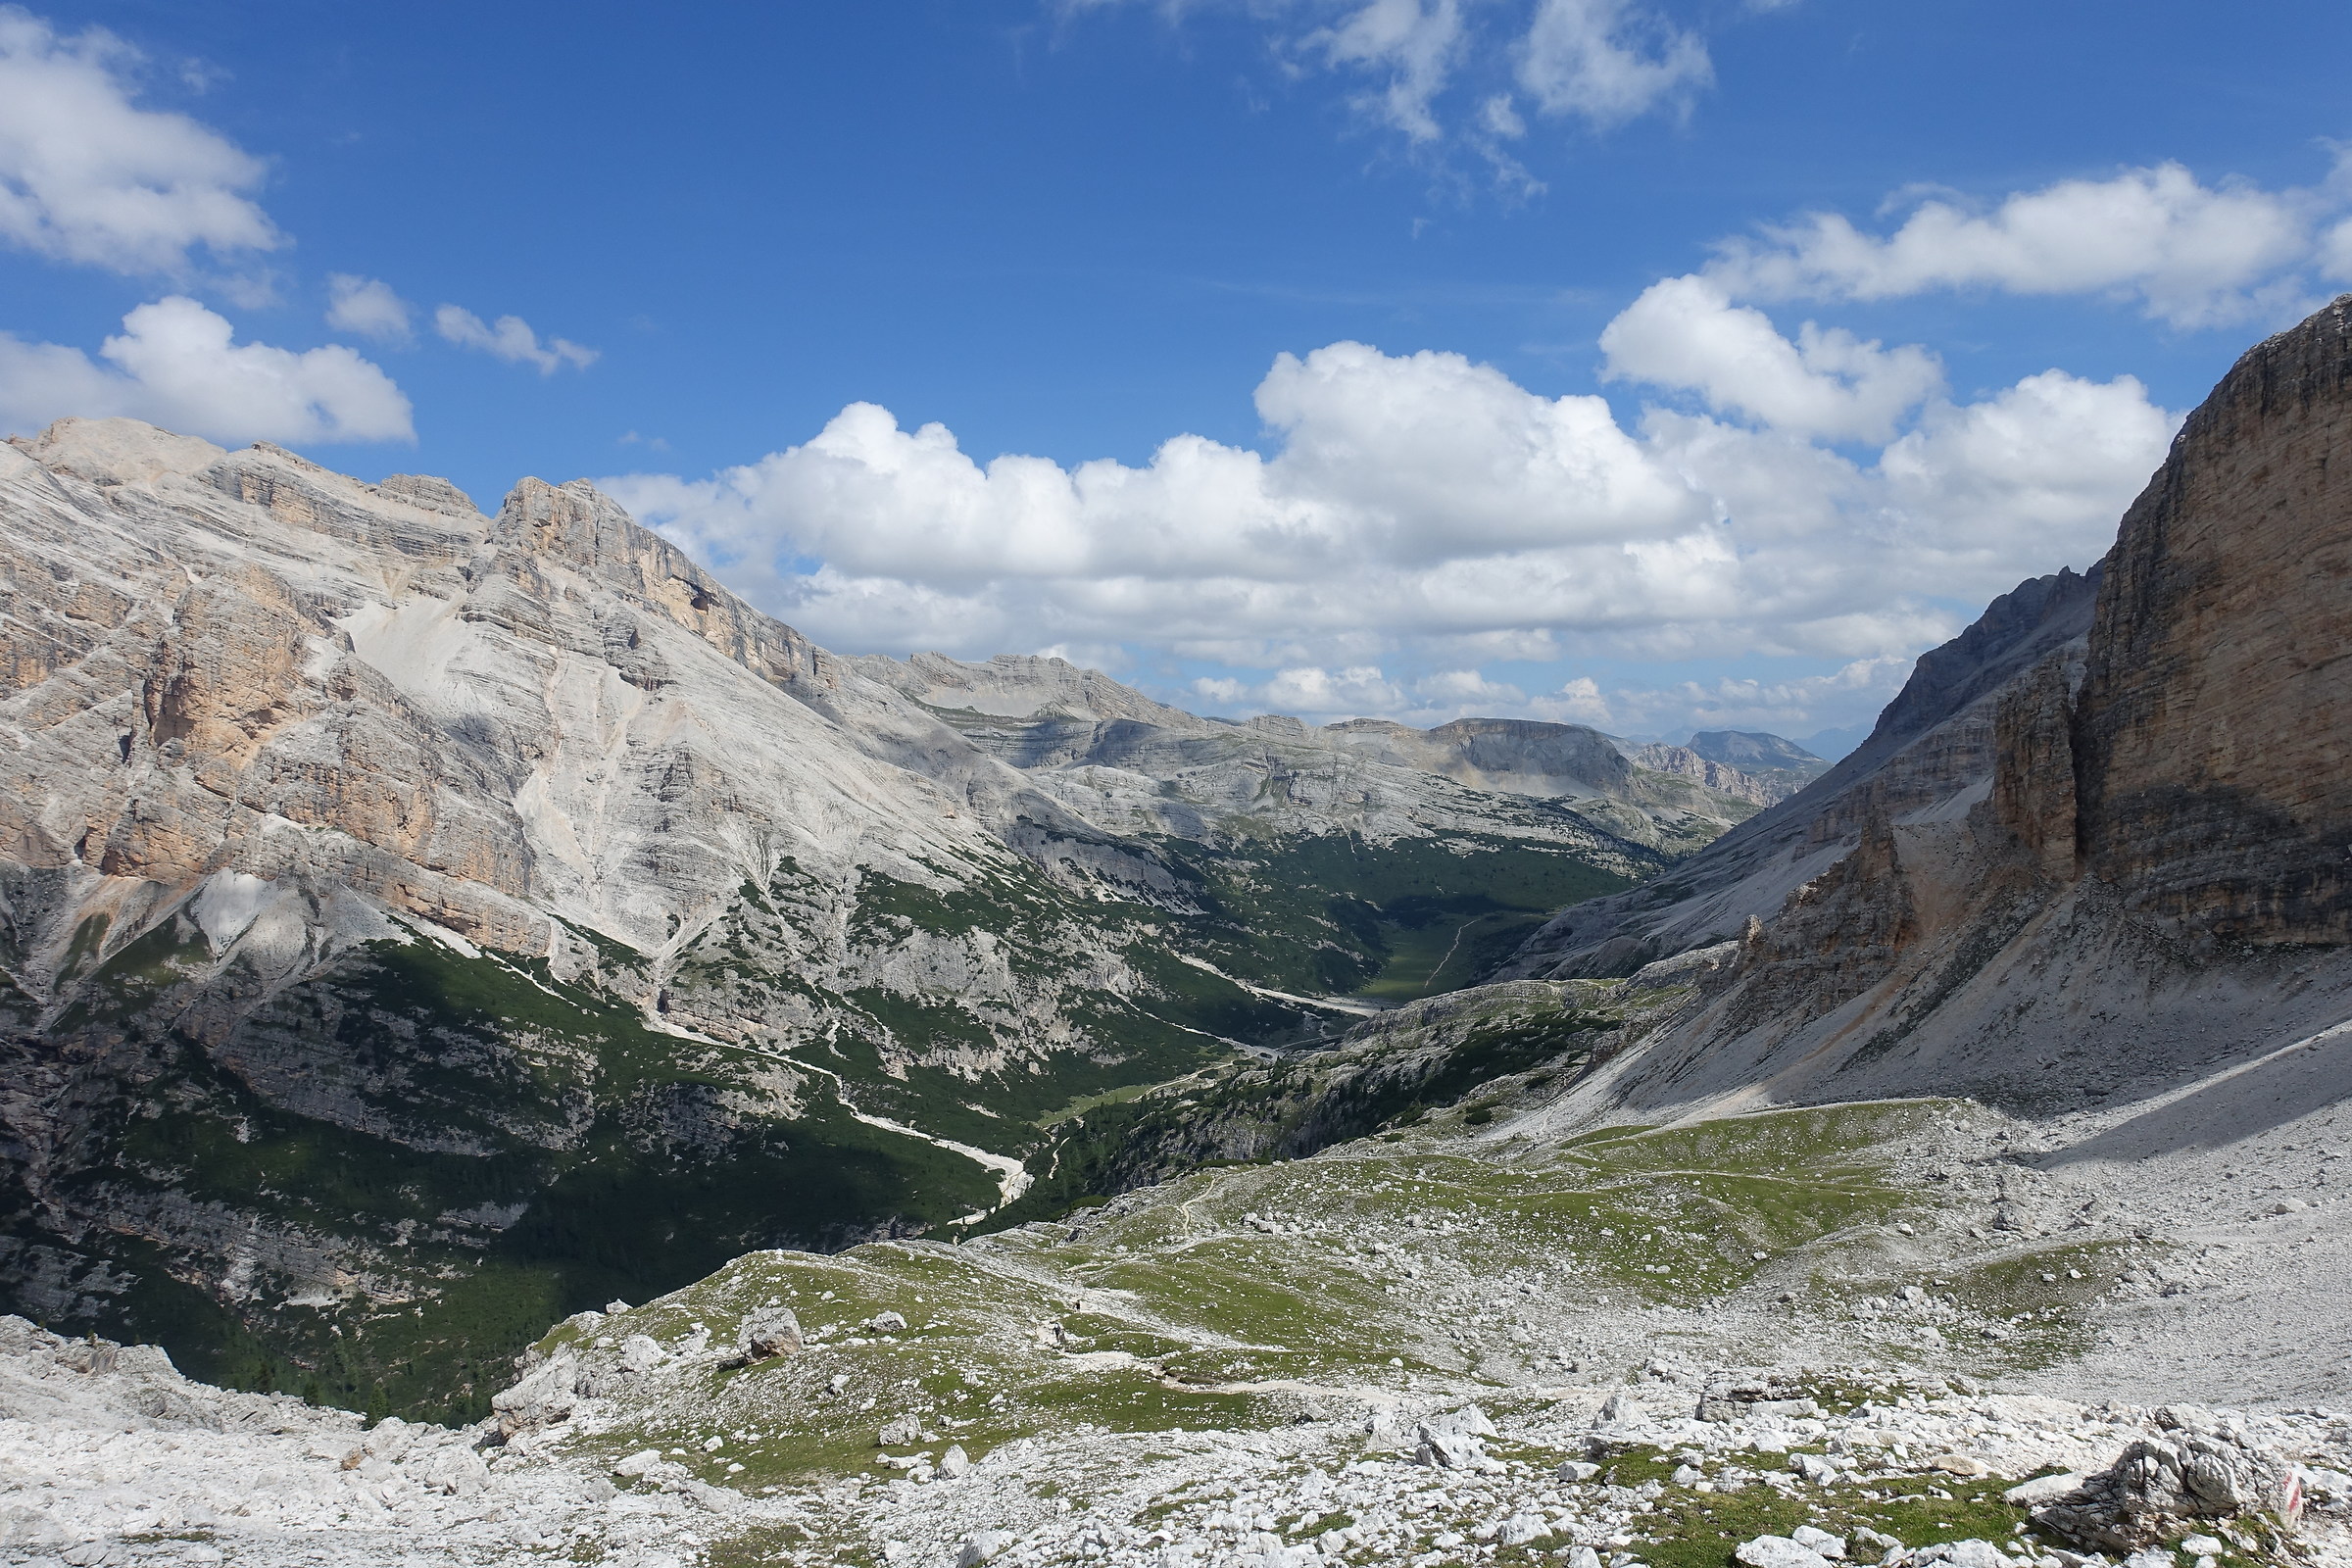 Along the dolomitic path...